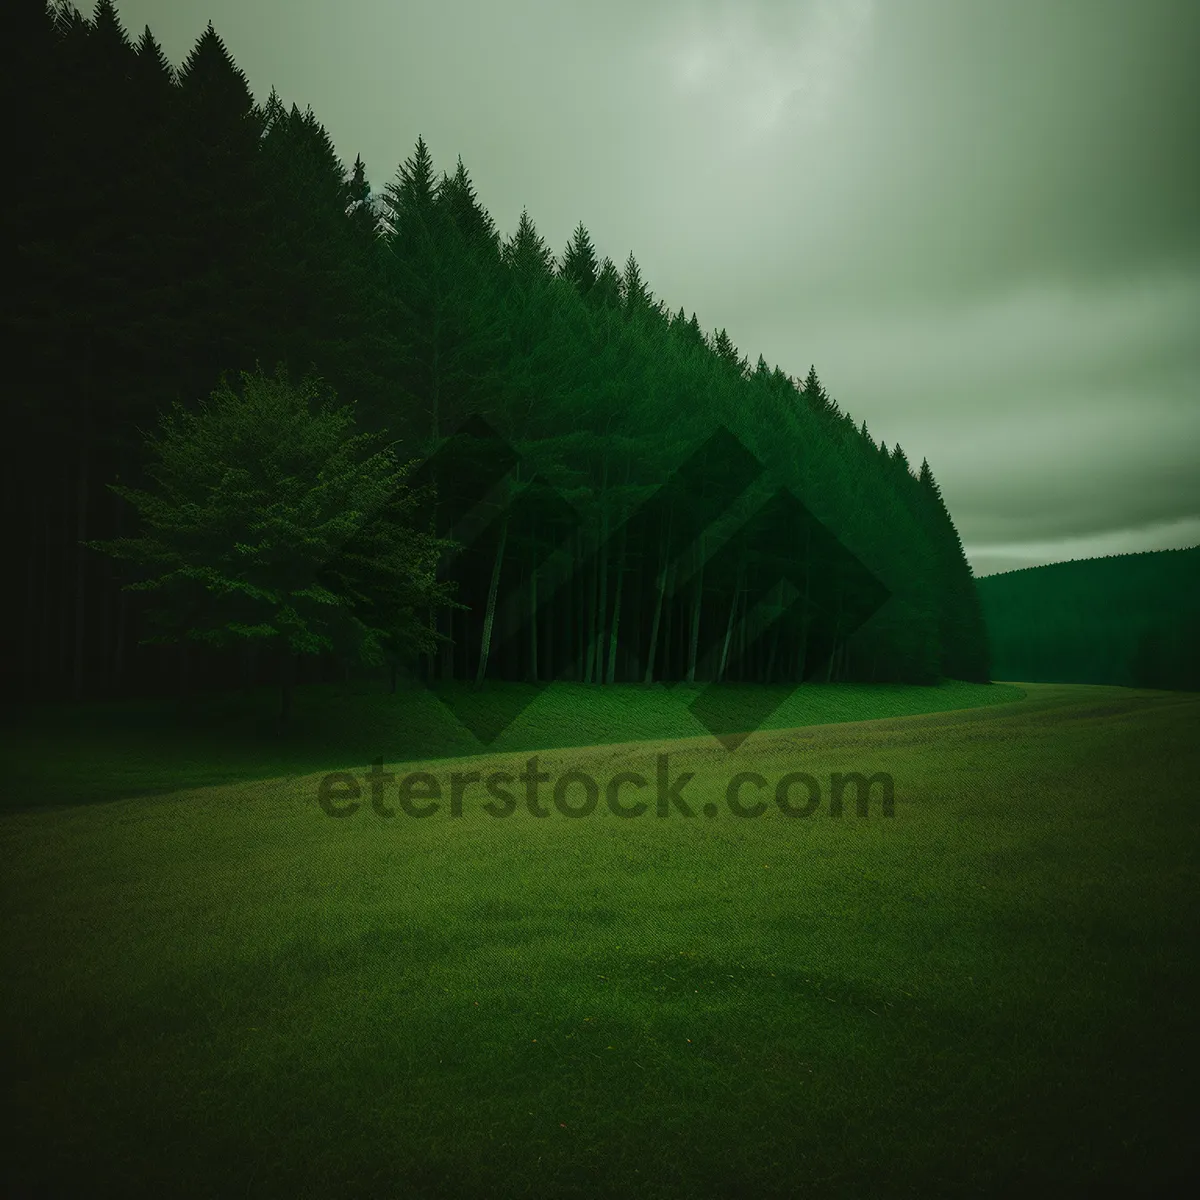 Picture of Scenic Golf Course in Rural Countryside